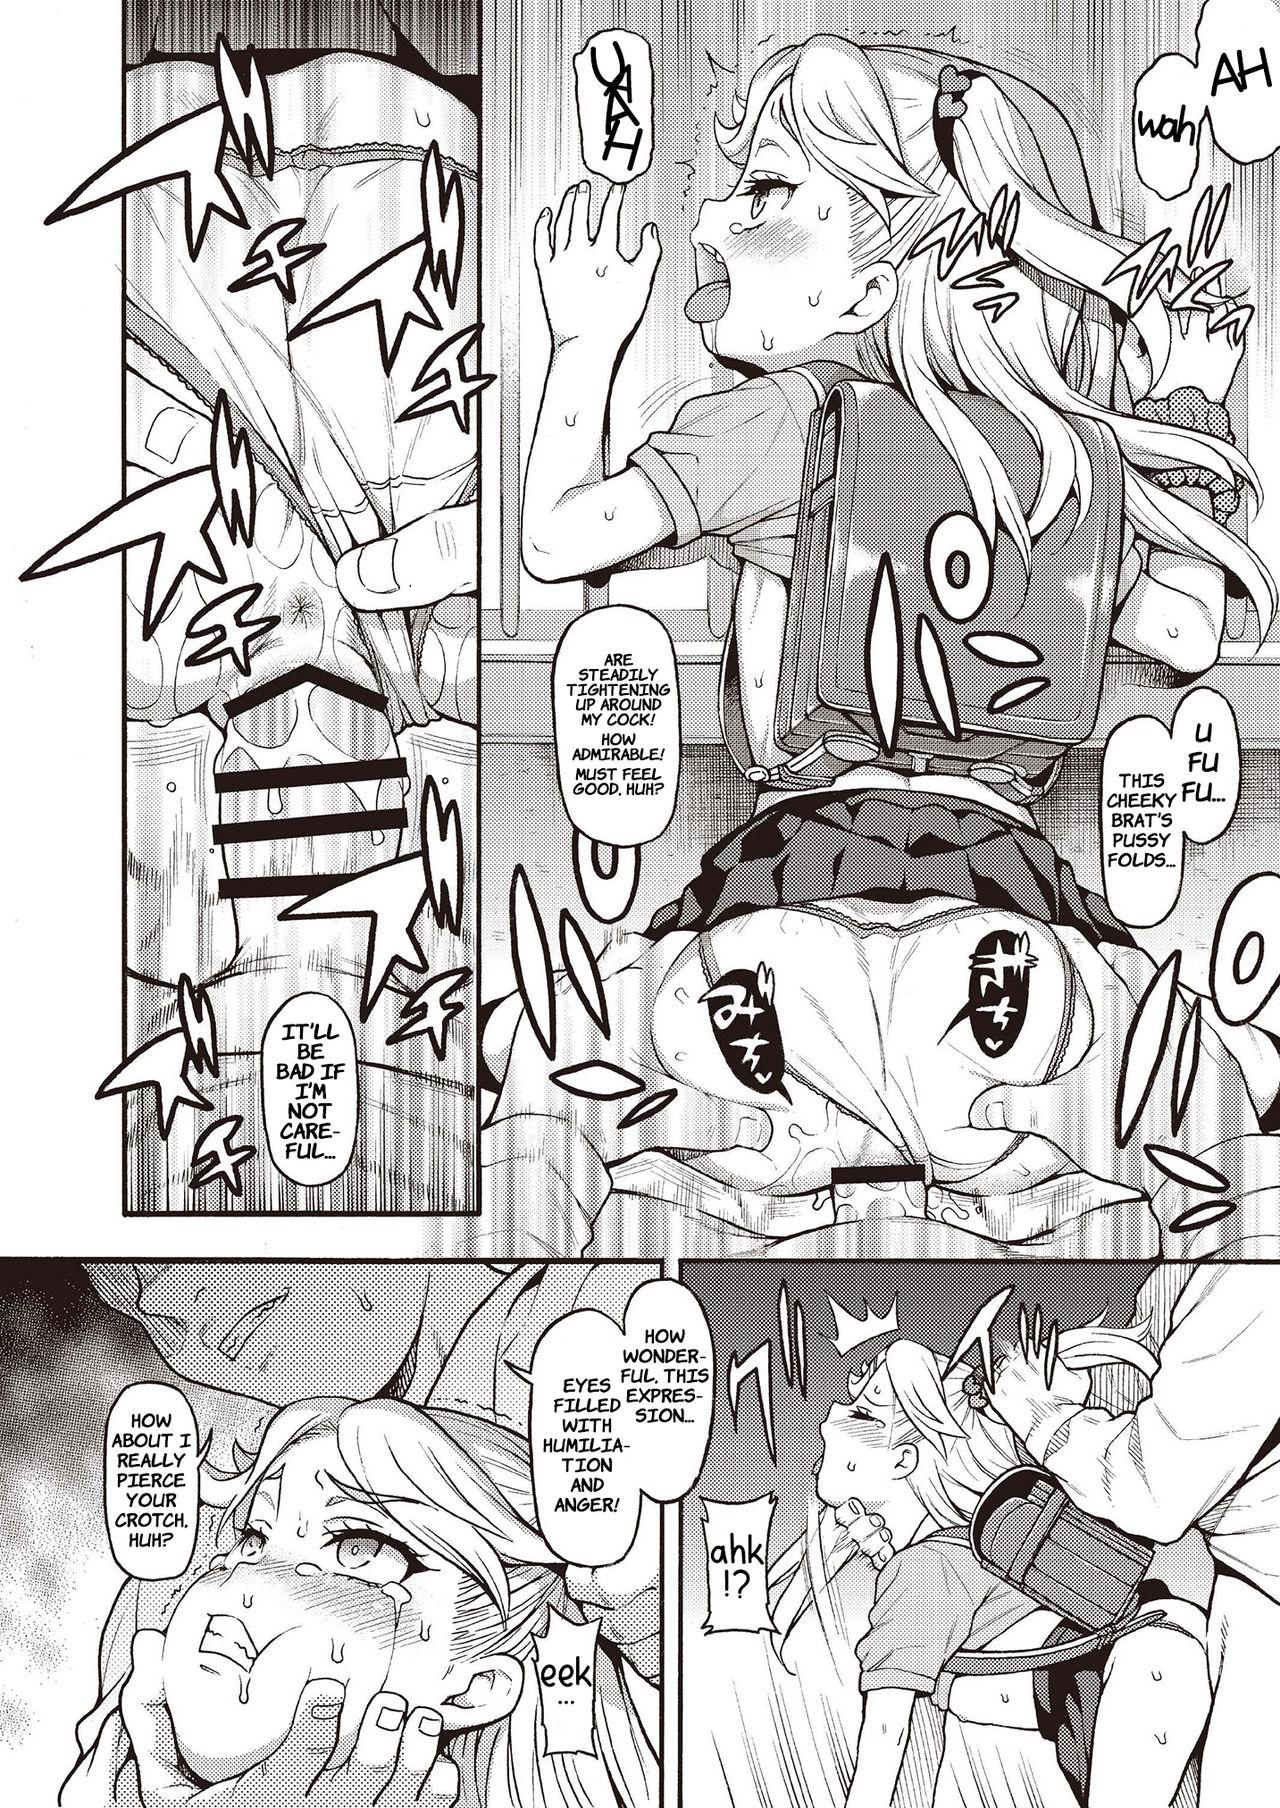 Older Mesugaki Wakarase Goudou | Putting Slutty Brats in Their Place: an Anthology - Original Gay Trimmed - Page 10